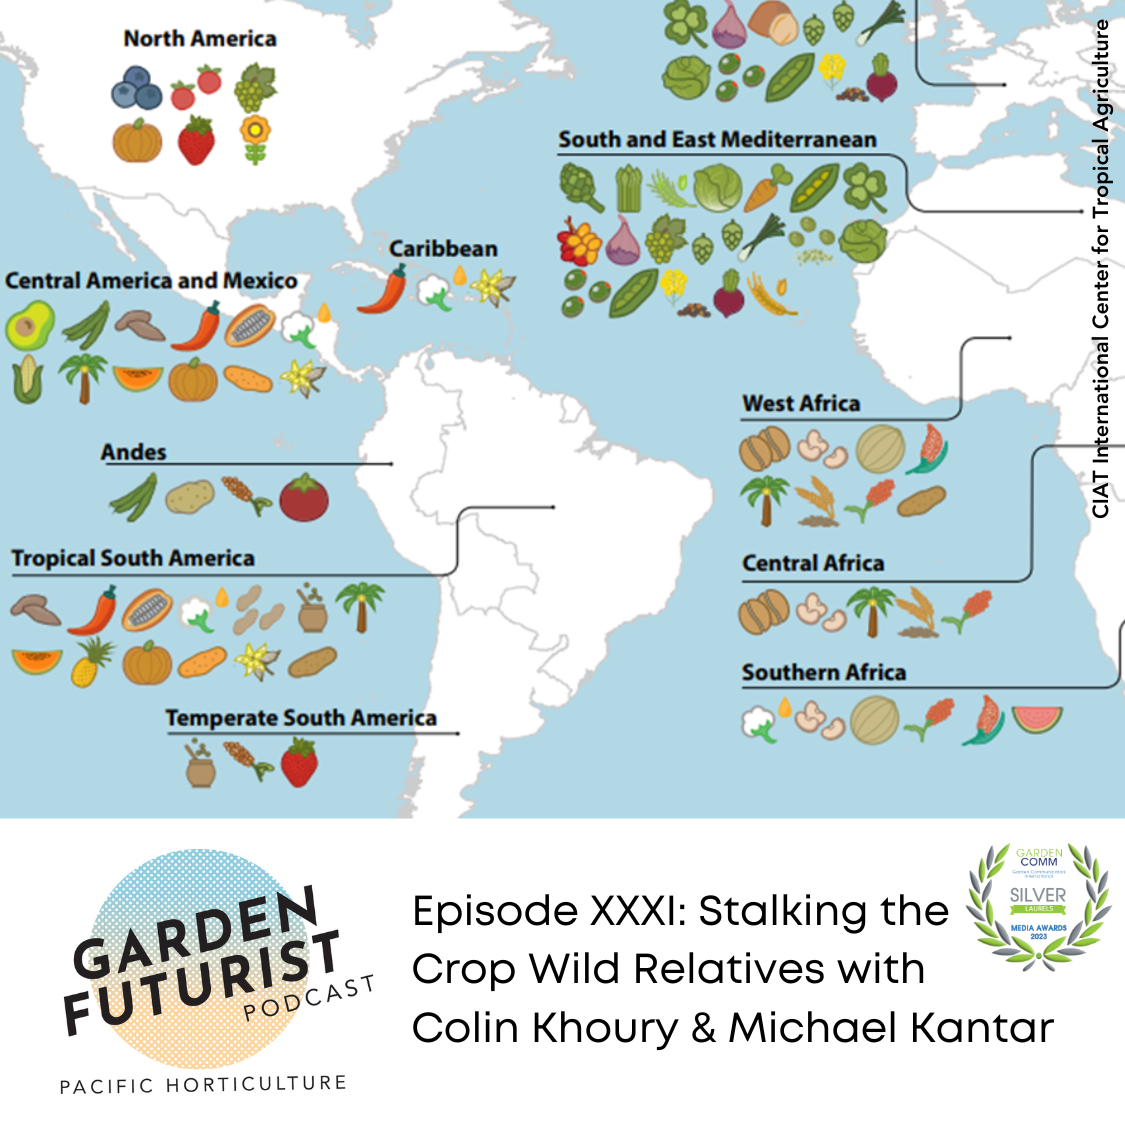 Episode XXXI: Stalking the Crop Wild Relatives with Colin Khoury and Michael Kantar